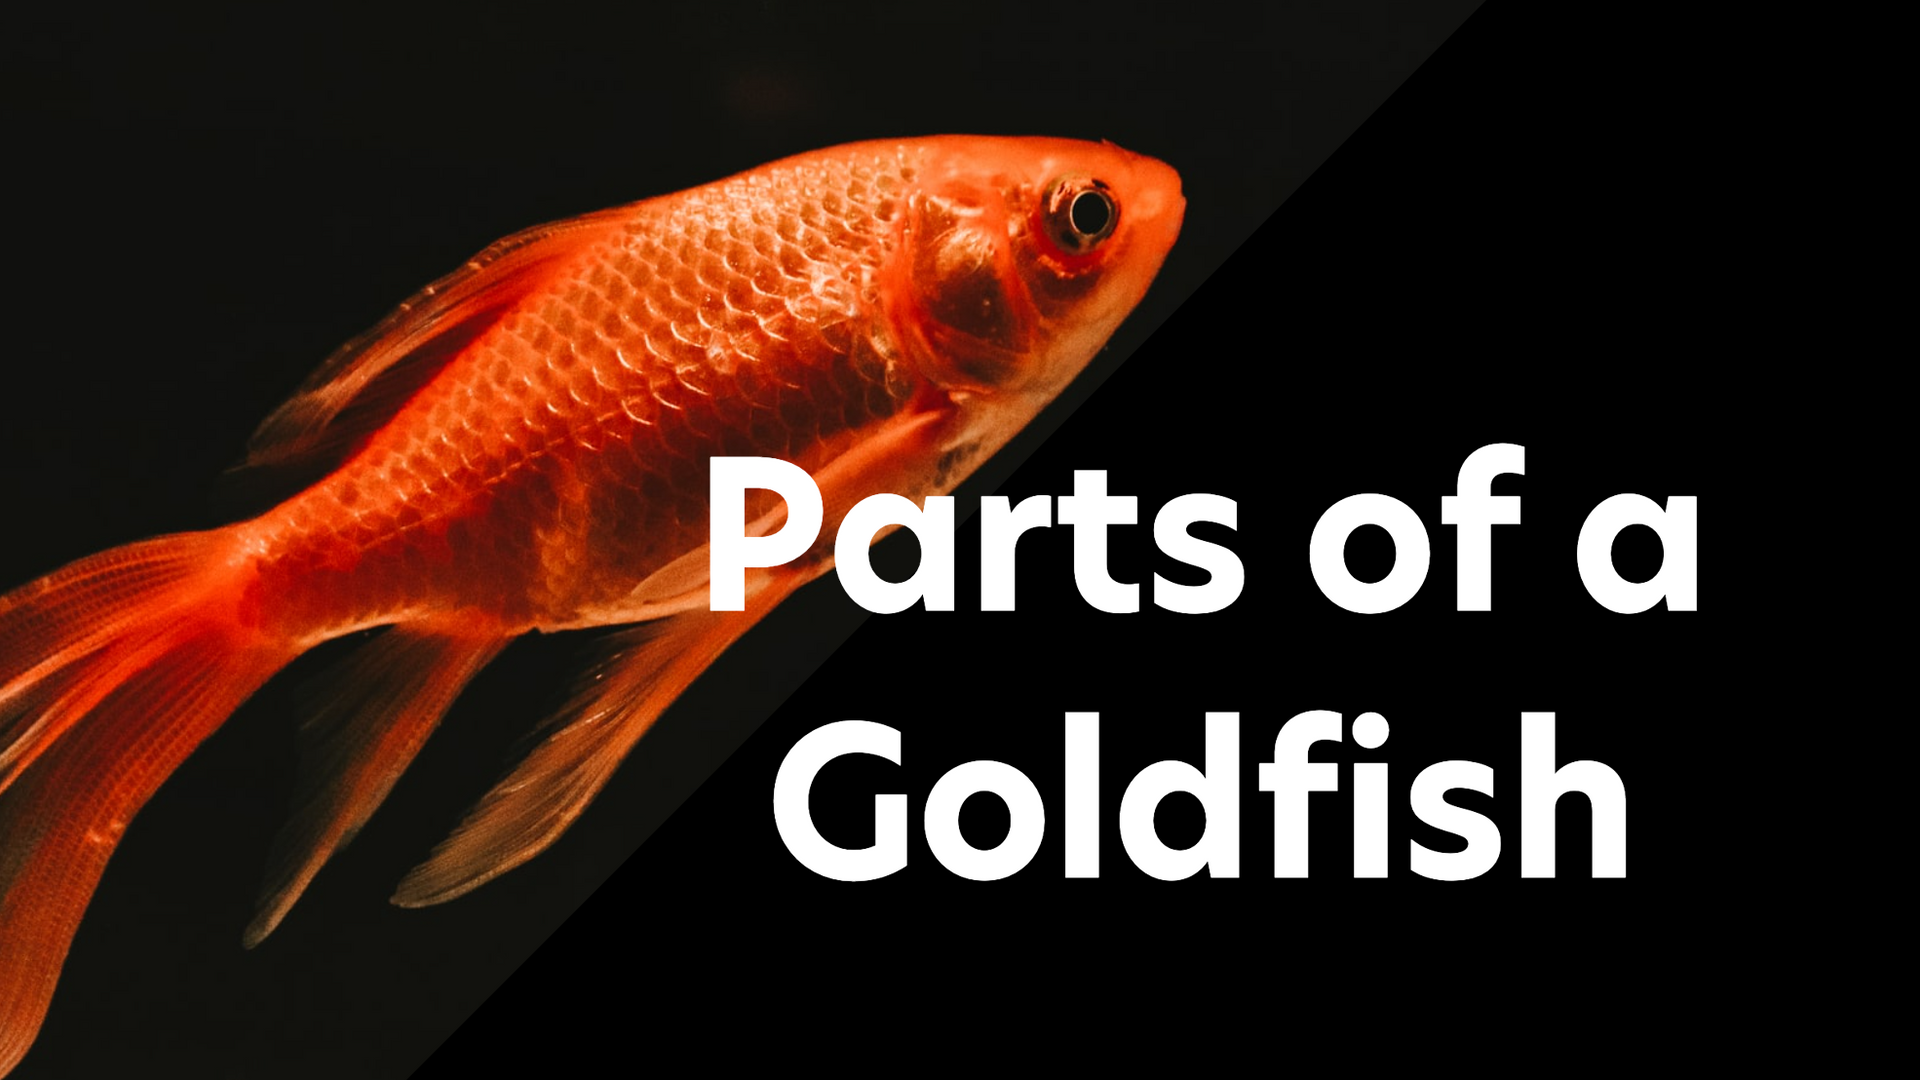 Parts of a Goldfish